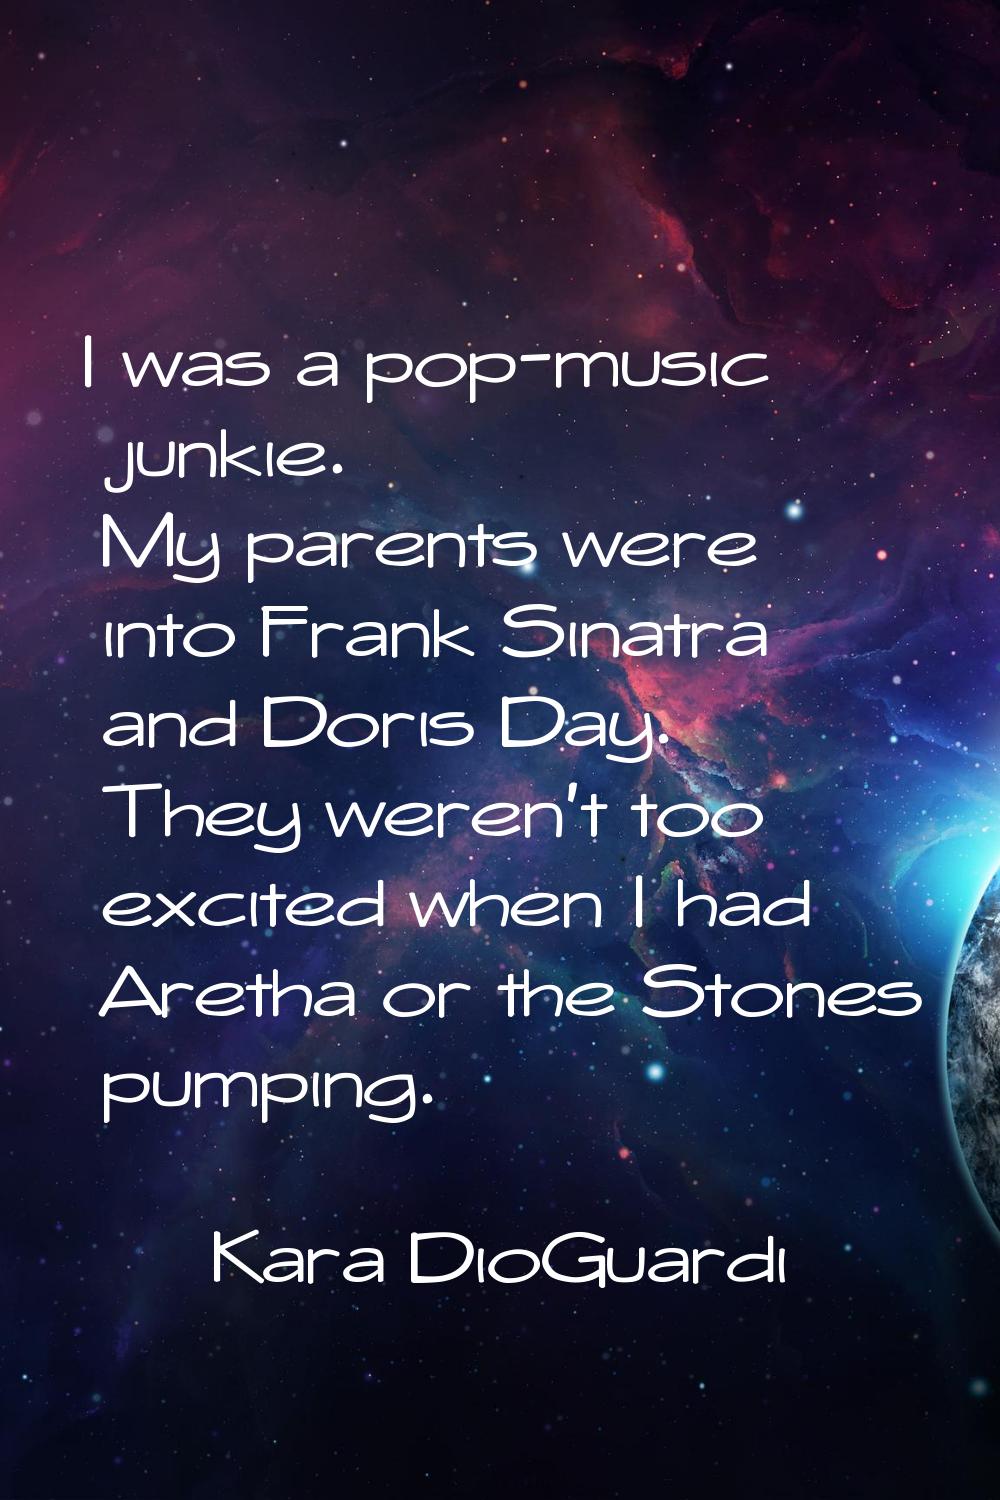 I was a pop-music junkie. My parents were into Frank Sinatra and Doris Day. They weren't too excite